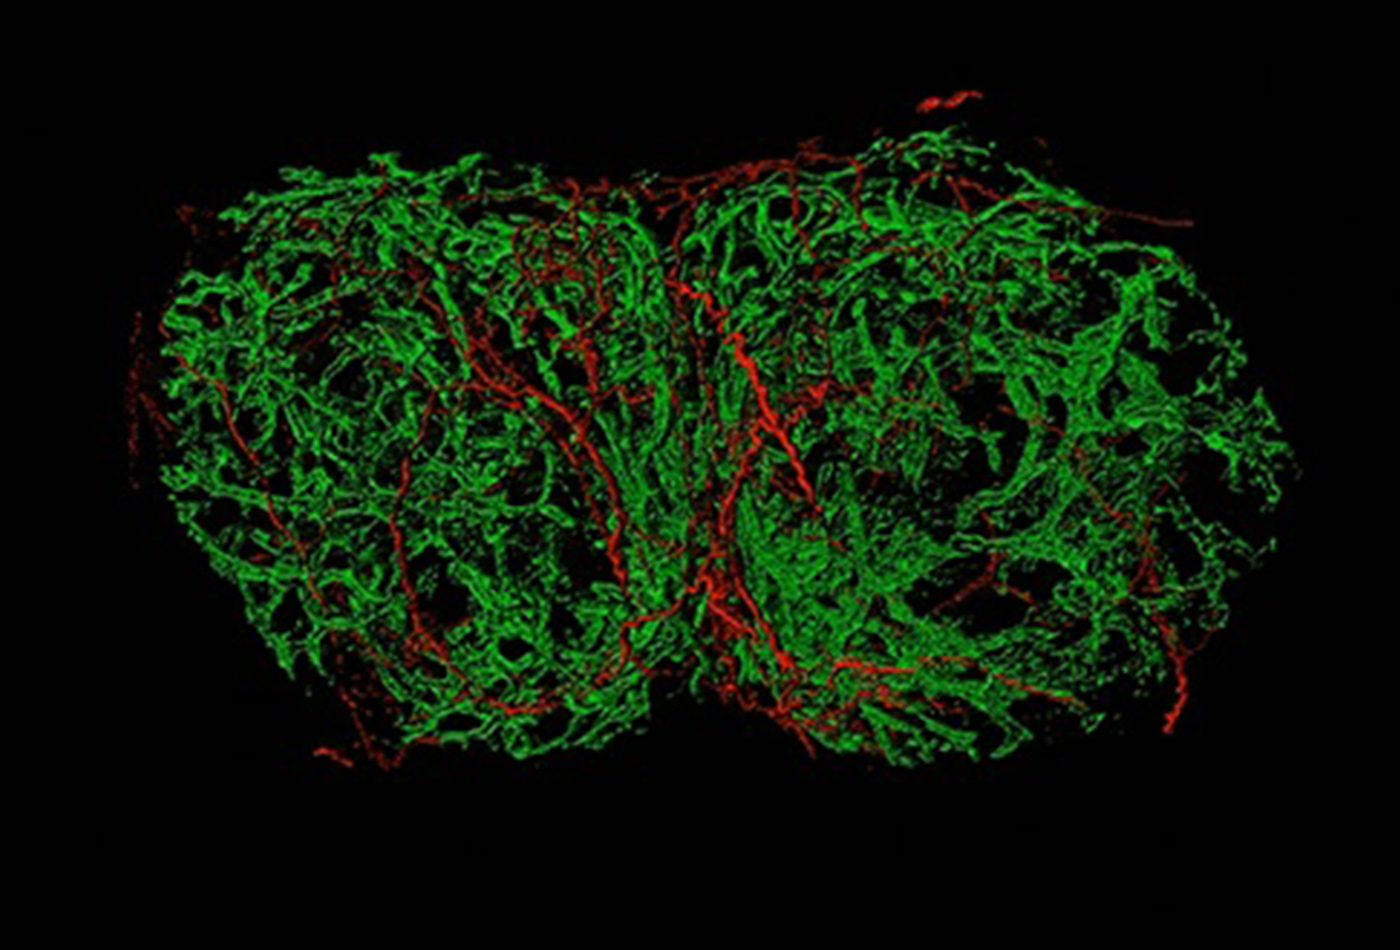 A red and green diagram depicting sensory nerve fibers interacting with lymph nodes.